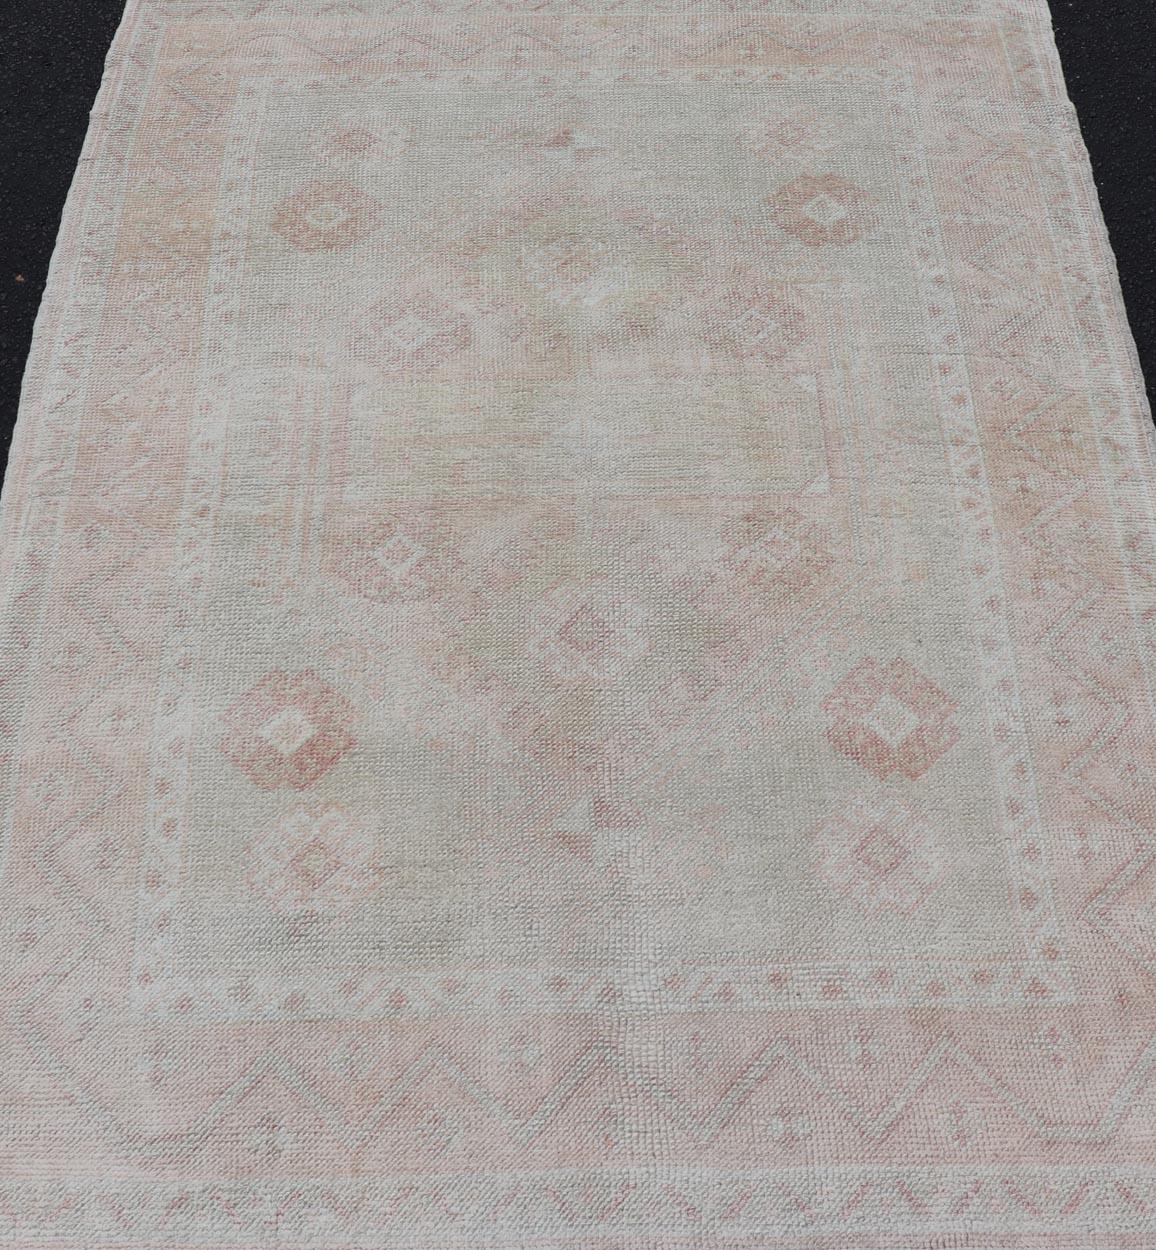 Hand-Knotted Vintage Oushak Rug with Pastel Colors in Tan, Green, Butter Yellow, and Pink For Sale